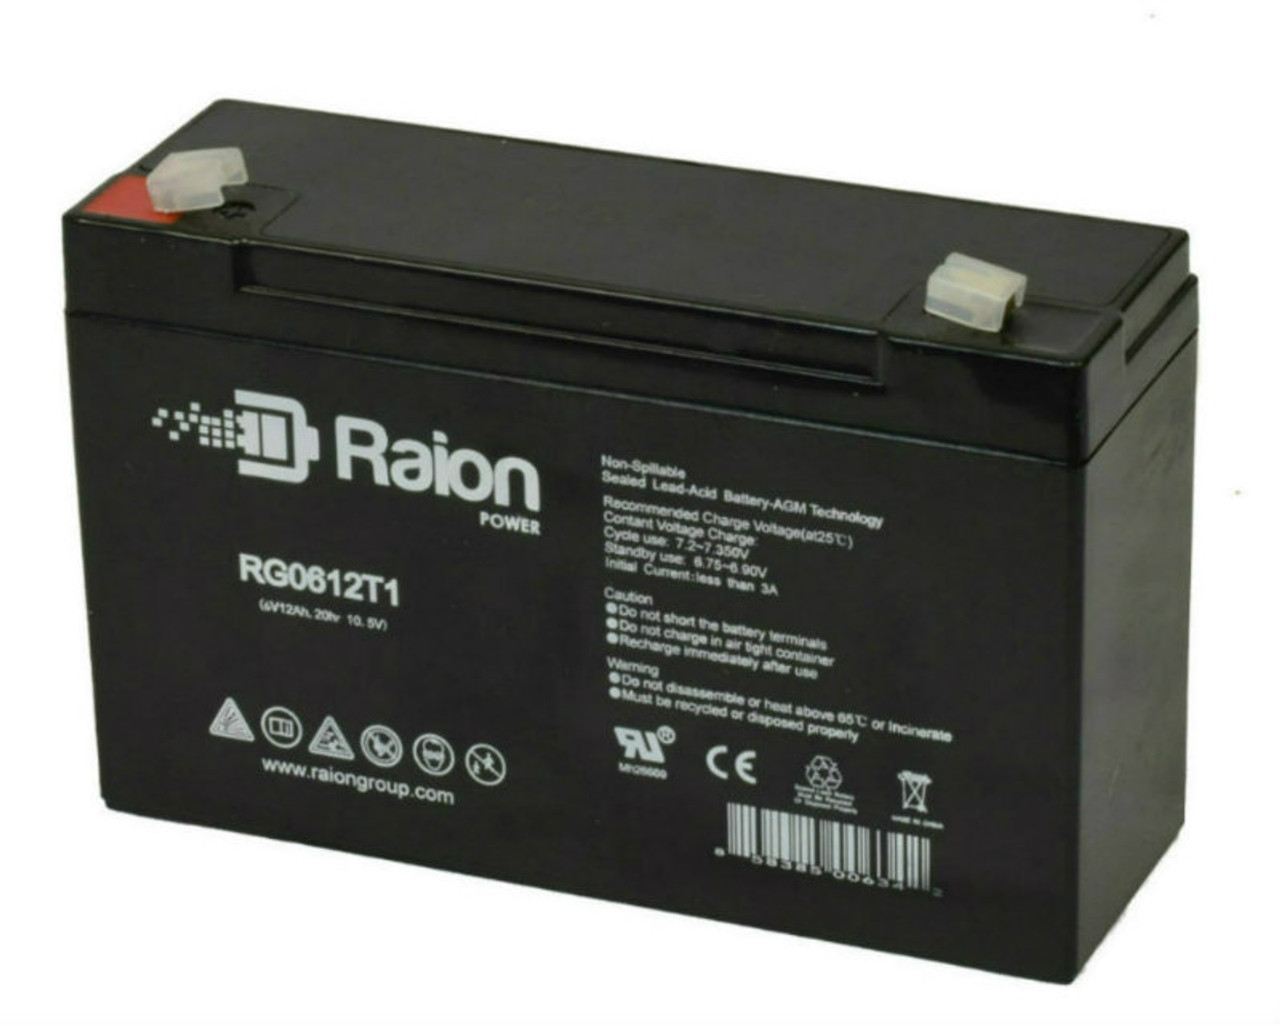 Raion Power RG06120T1 Replacement 6V 12Ah Emergency Light Battery for Teledyne H2BR12S7